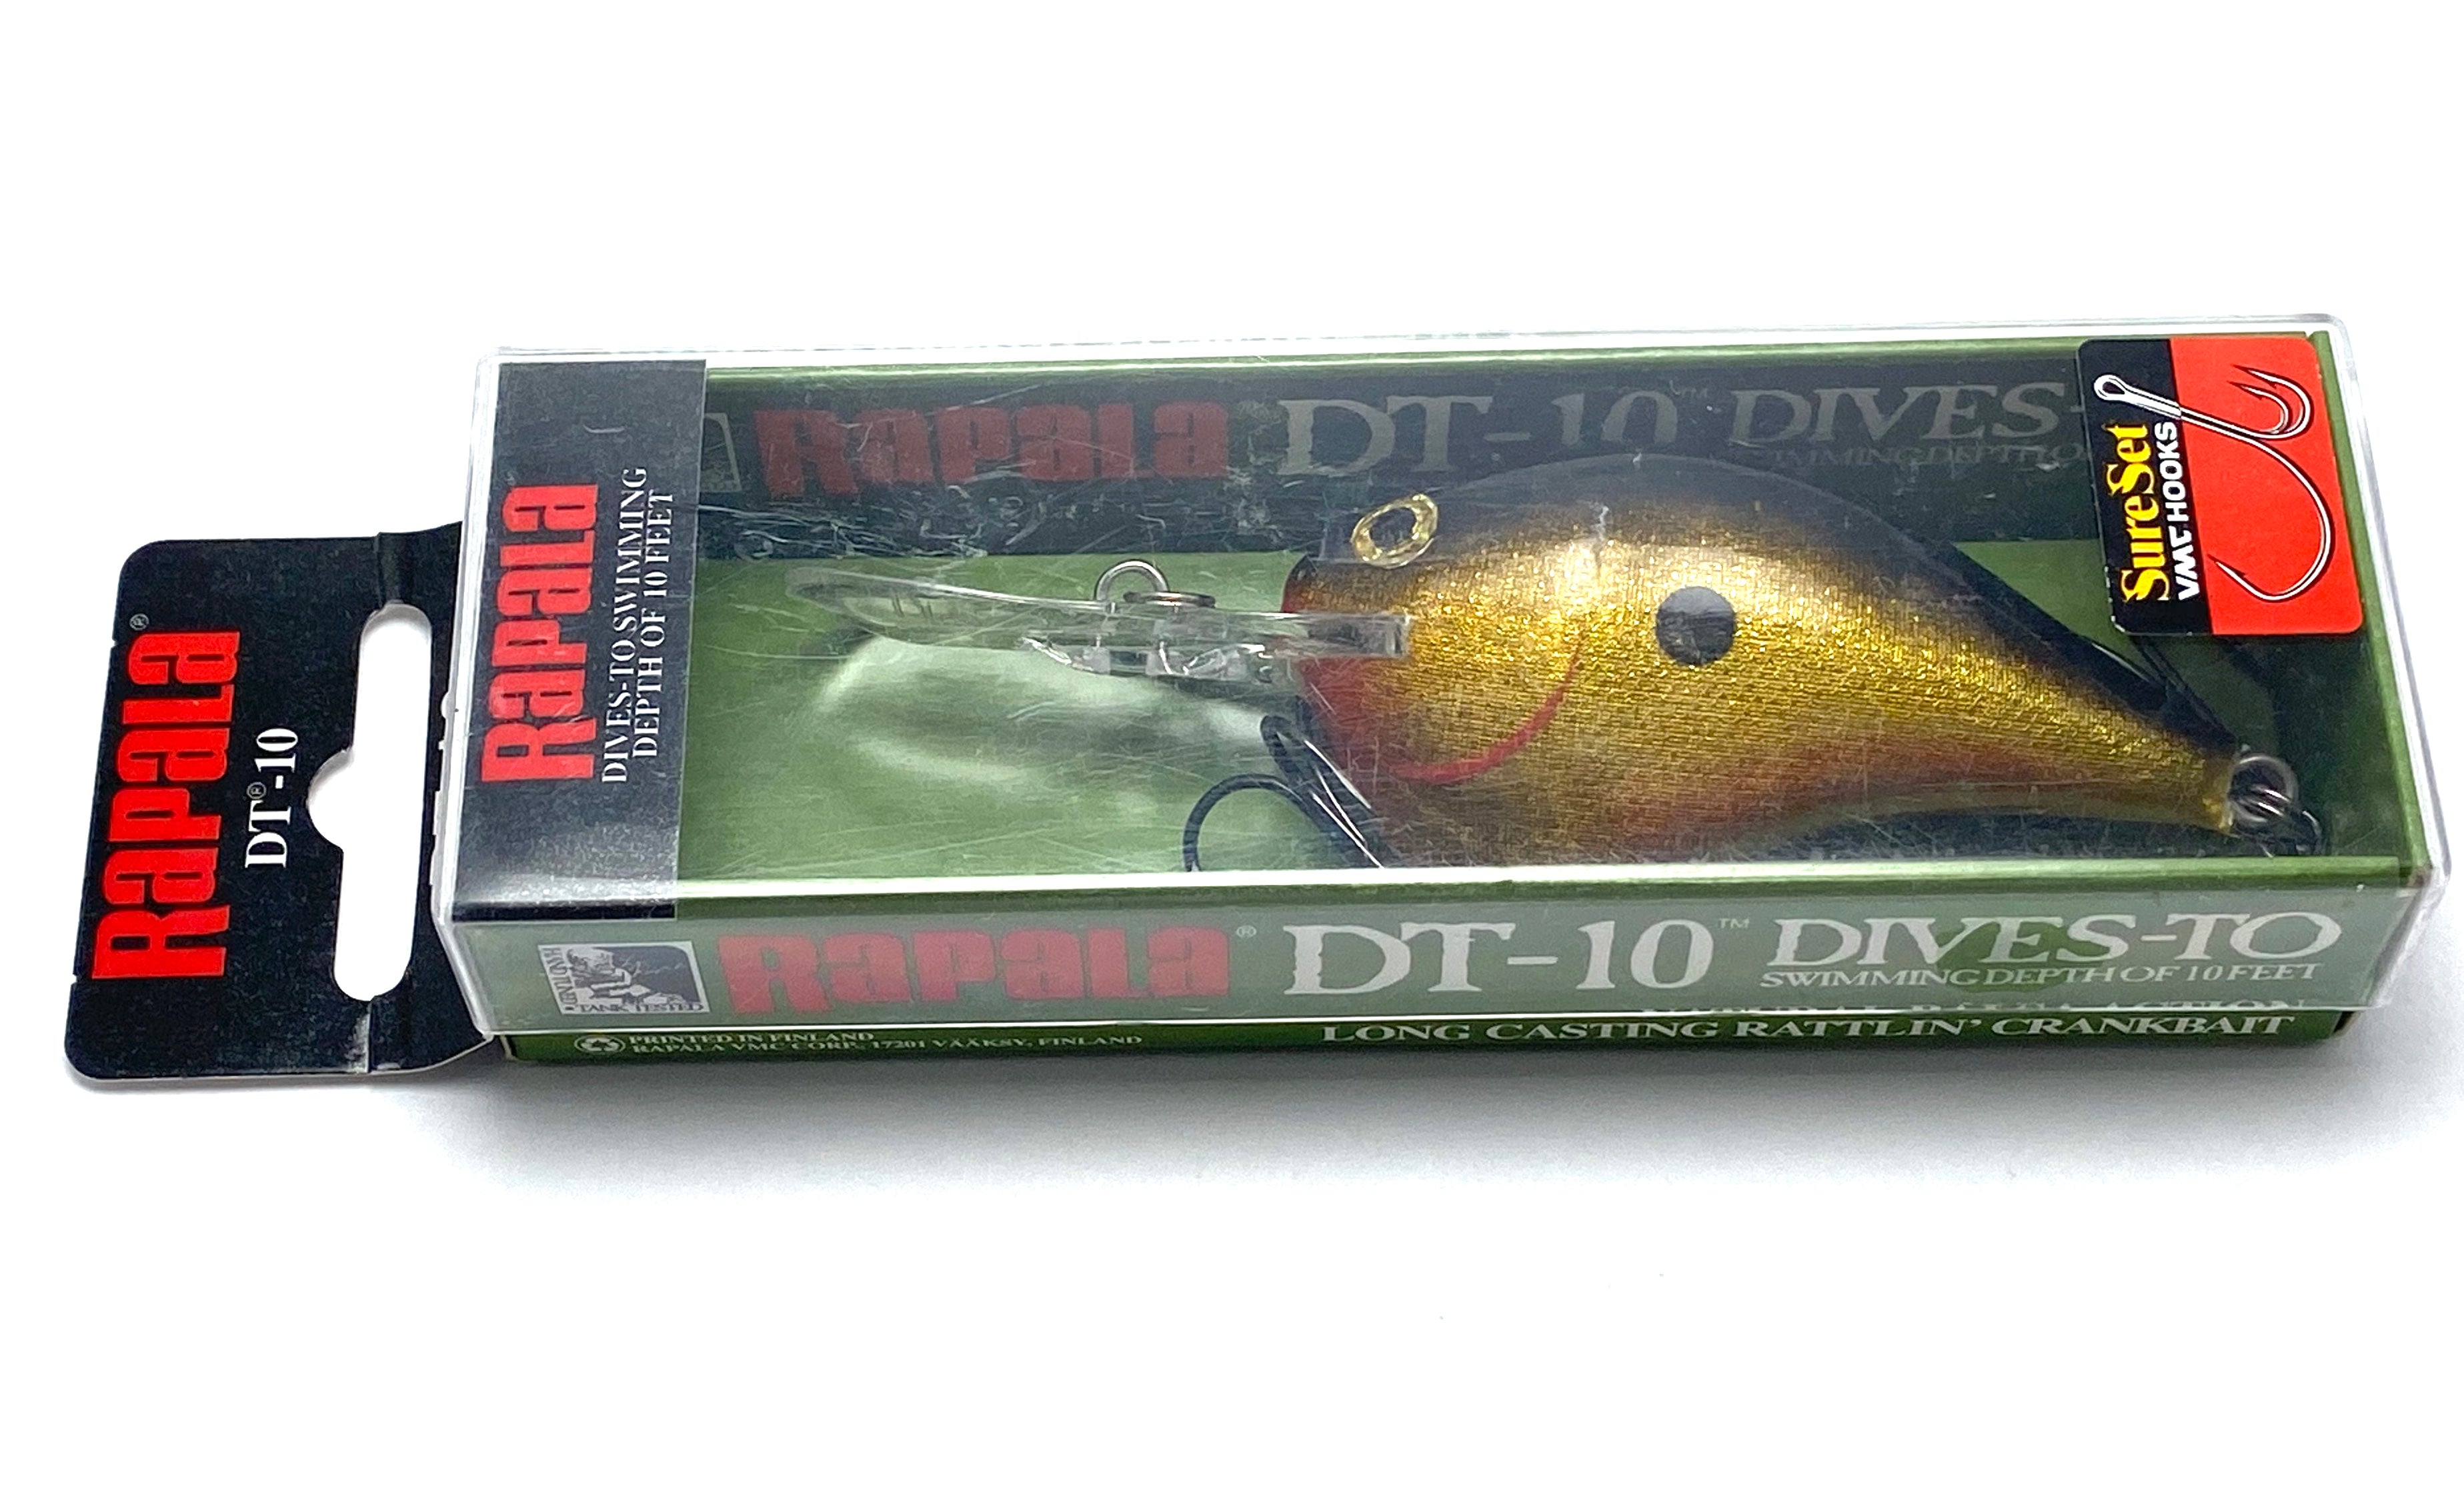 Rapala DT-10 Fishing Lure • GOLD DTSS10G • DIVES-TO 10 Feet – Toad